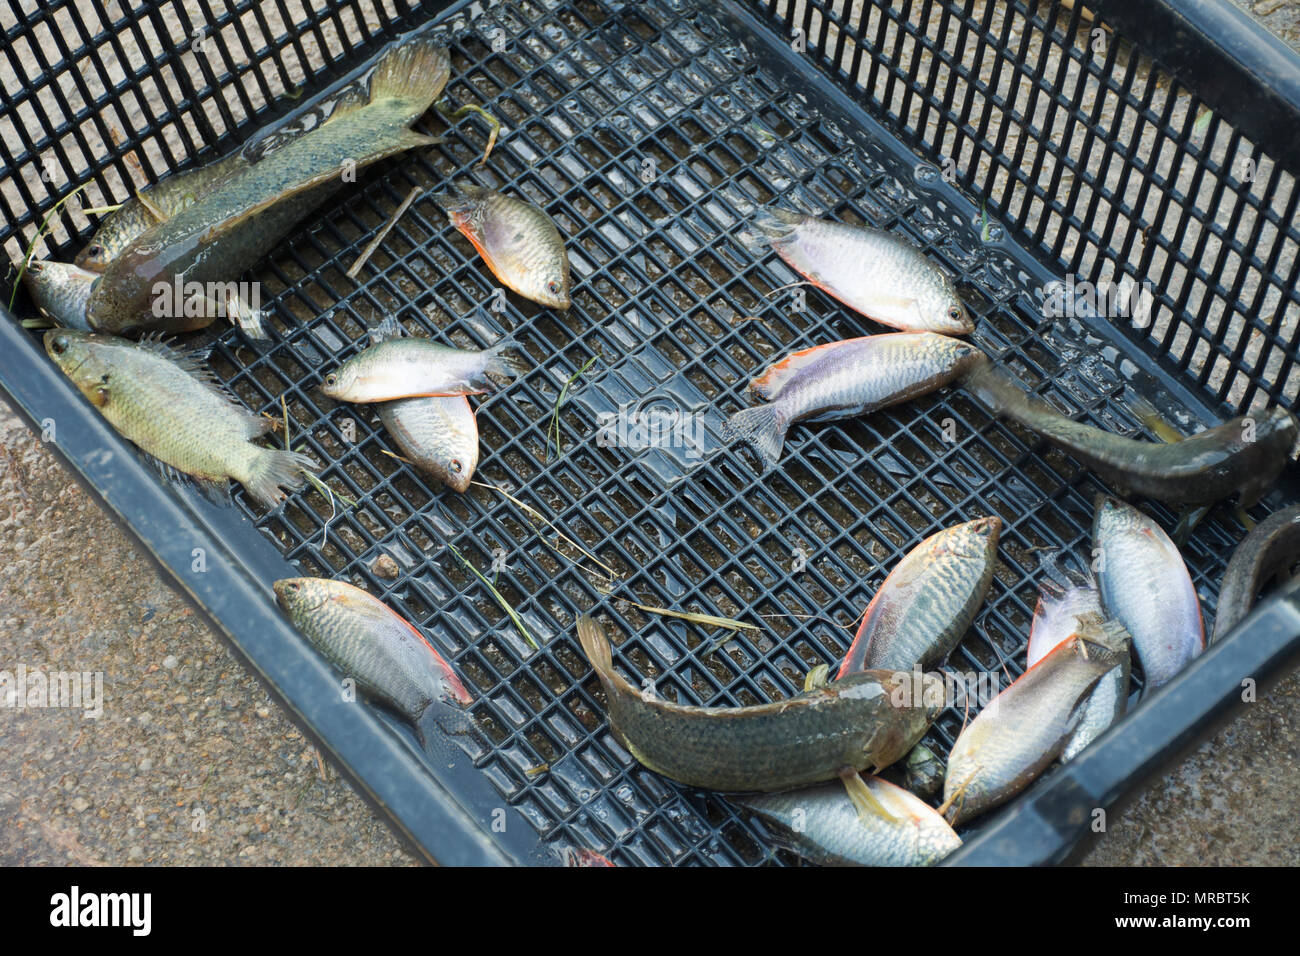 Thai people catch Moonlight gourami fish and Climbing gourami put down in plastic basket at countryside of Thailand Stock Photo